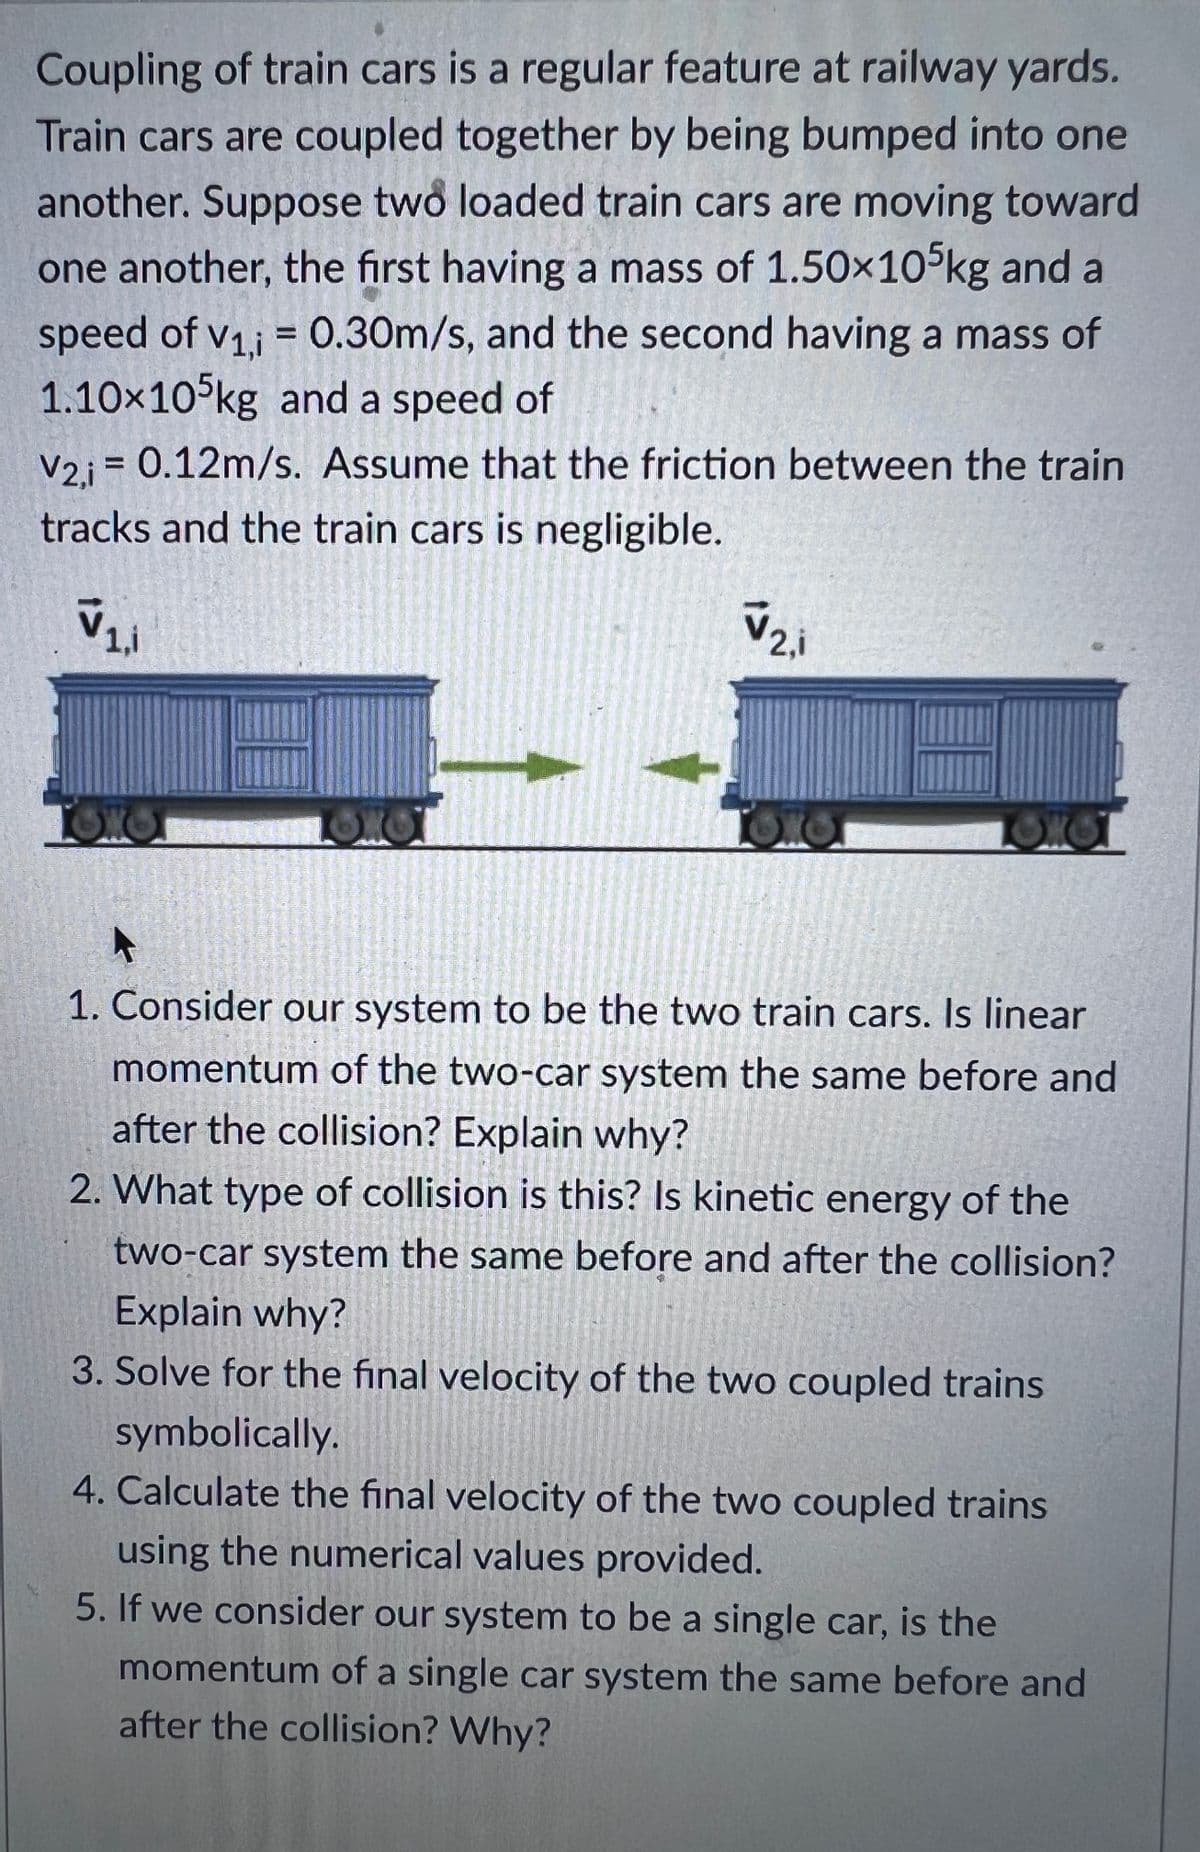 Coupling of train cars is a regular feature at railway yards.
Train cars are coupled together by being bumped into one
another. Suppose two loaded train cars are moving toward
one another, the first having a mass of 1.50×105kg and a
speed of V₁,i = 0.30m/s, and the second having a mass of
1.10×105kg and a speed of
V2,i = 0.12m/s. Assume that the friction between the train
tracks and the train cars is negligible.
V₁,1
OX
V2.i
LOX
OK
A
1. Consider our system to be the two train cars. Is linear
momentum of the two-car system the same before and
after the collision? Explain why?
2. What type of collision is this? Is kinetic energy of the
two-car system the same before and after the collision?
Explain why?
3. Solve for the final velocity of the two coupled trains
symbolically.
4. Calculate the final velocity of the two coupled trains
using the numerical values provided.
If we consider our system to be a single car, is the
momentum of a single car system the same before and
after the collision? Why?